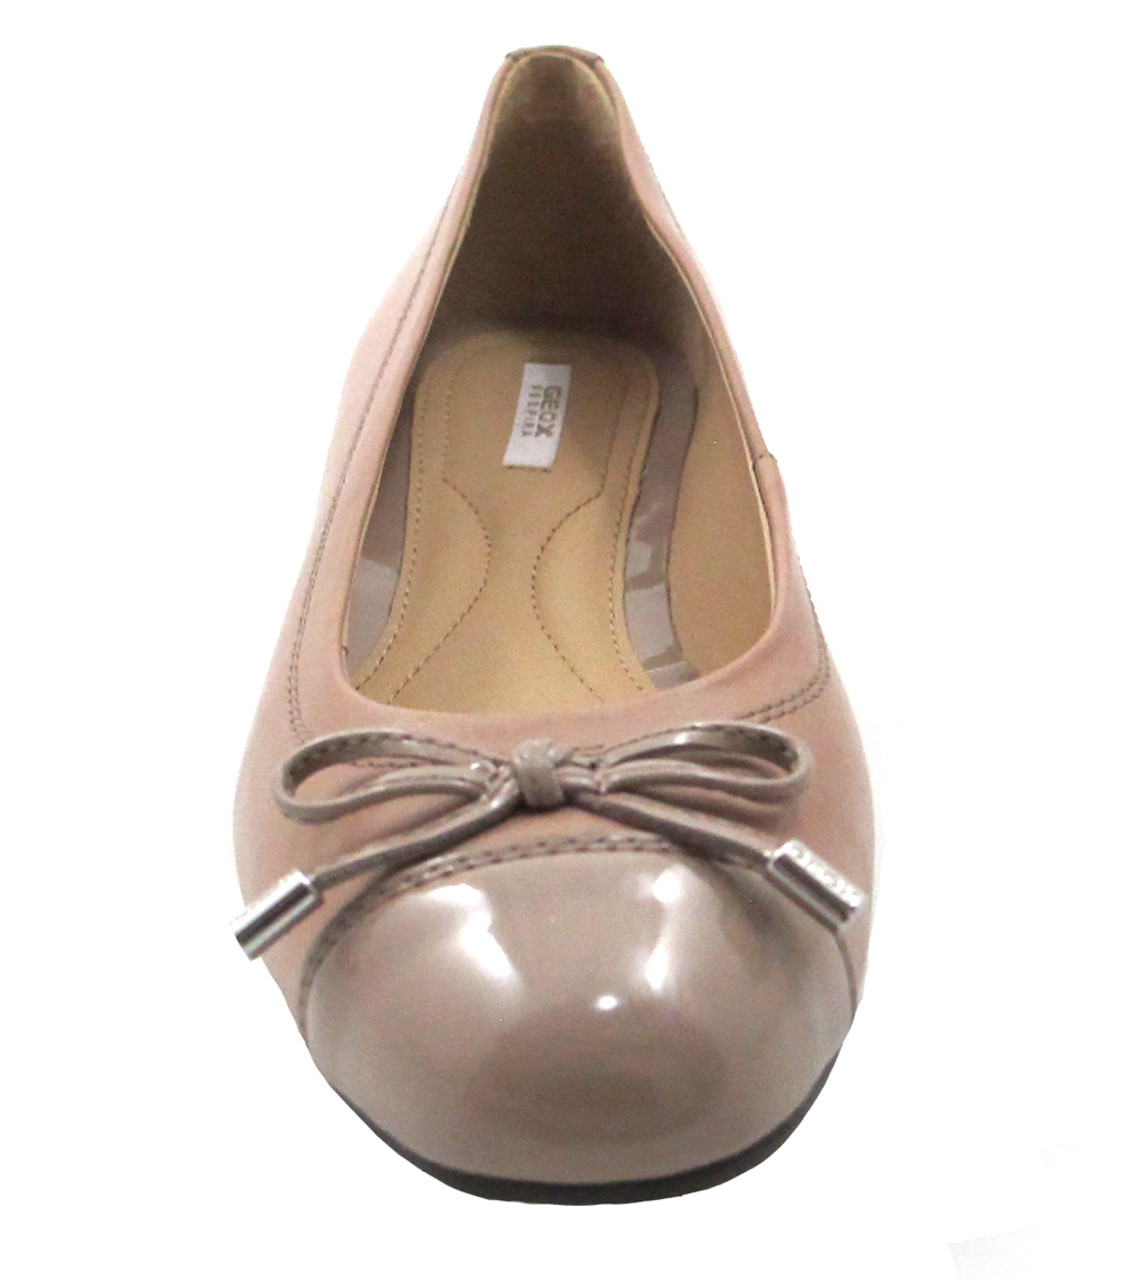 Geox Respira Dlola L - Nappa Patent Leather Flat Ballet shoes in Grey or  Black